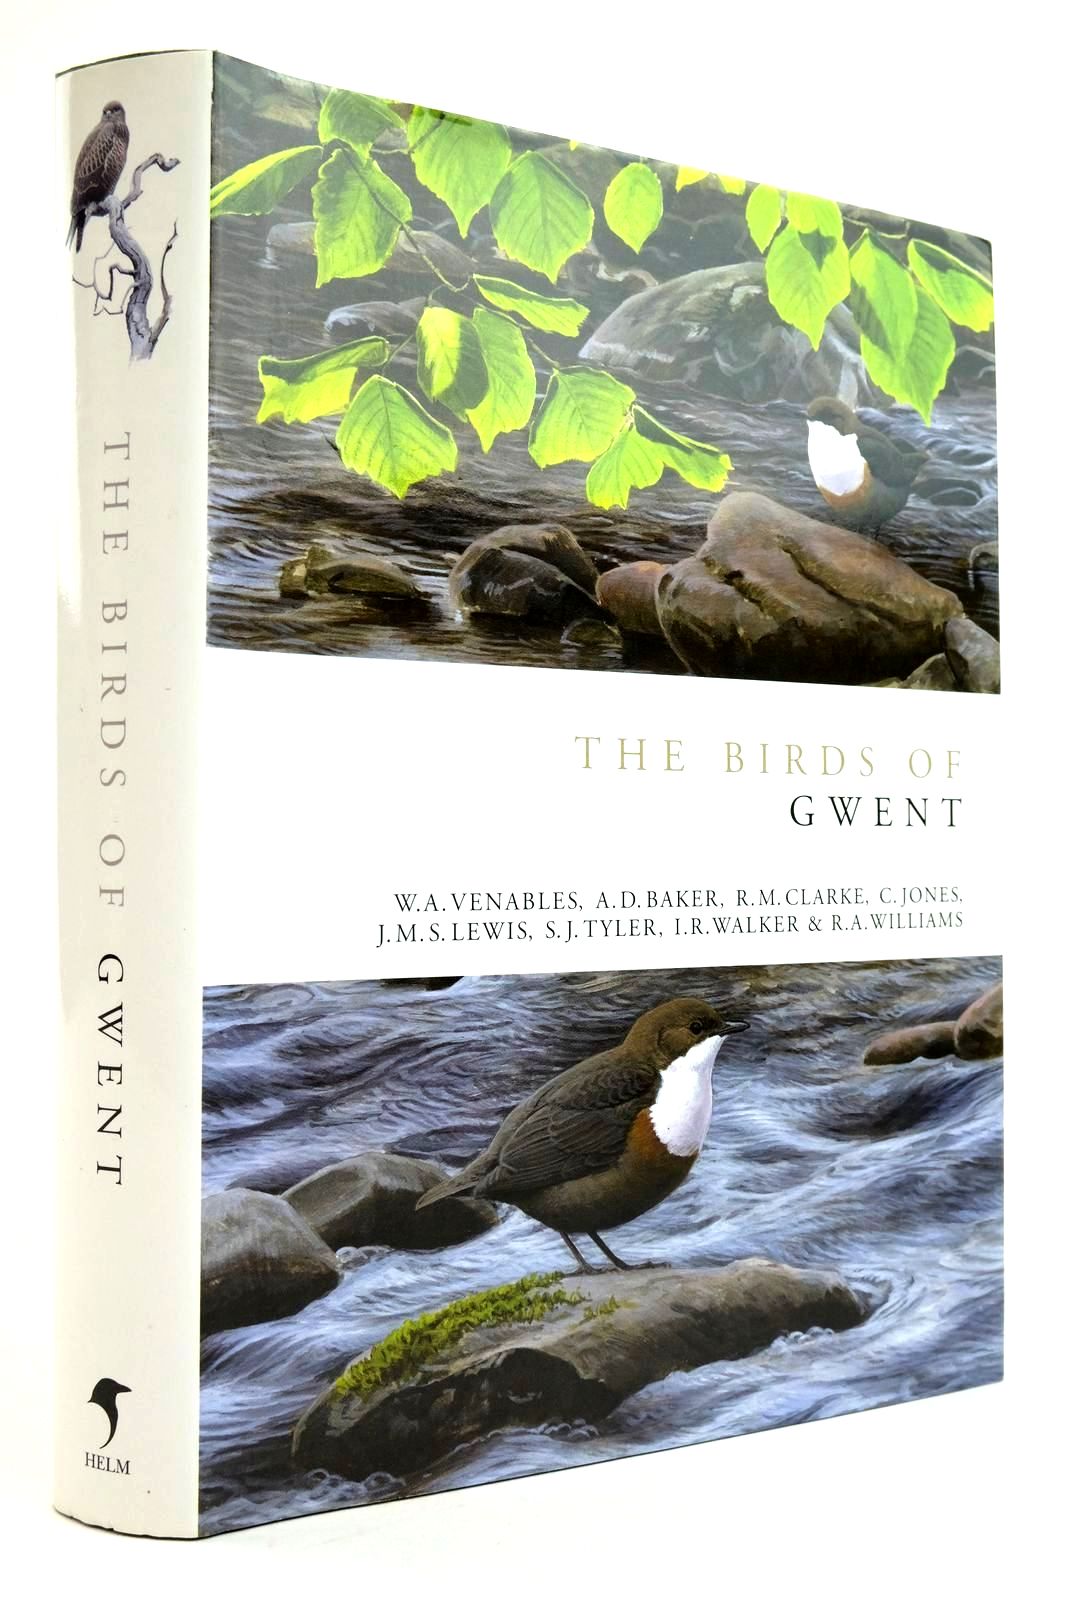 Photo of THE BIRDS OF GWENT written by Venables, W.A. Baker, A.D. et al,  published by Christopher Helm (STOCK CODE: 2135512)  for sale by Stella & Rose's Books